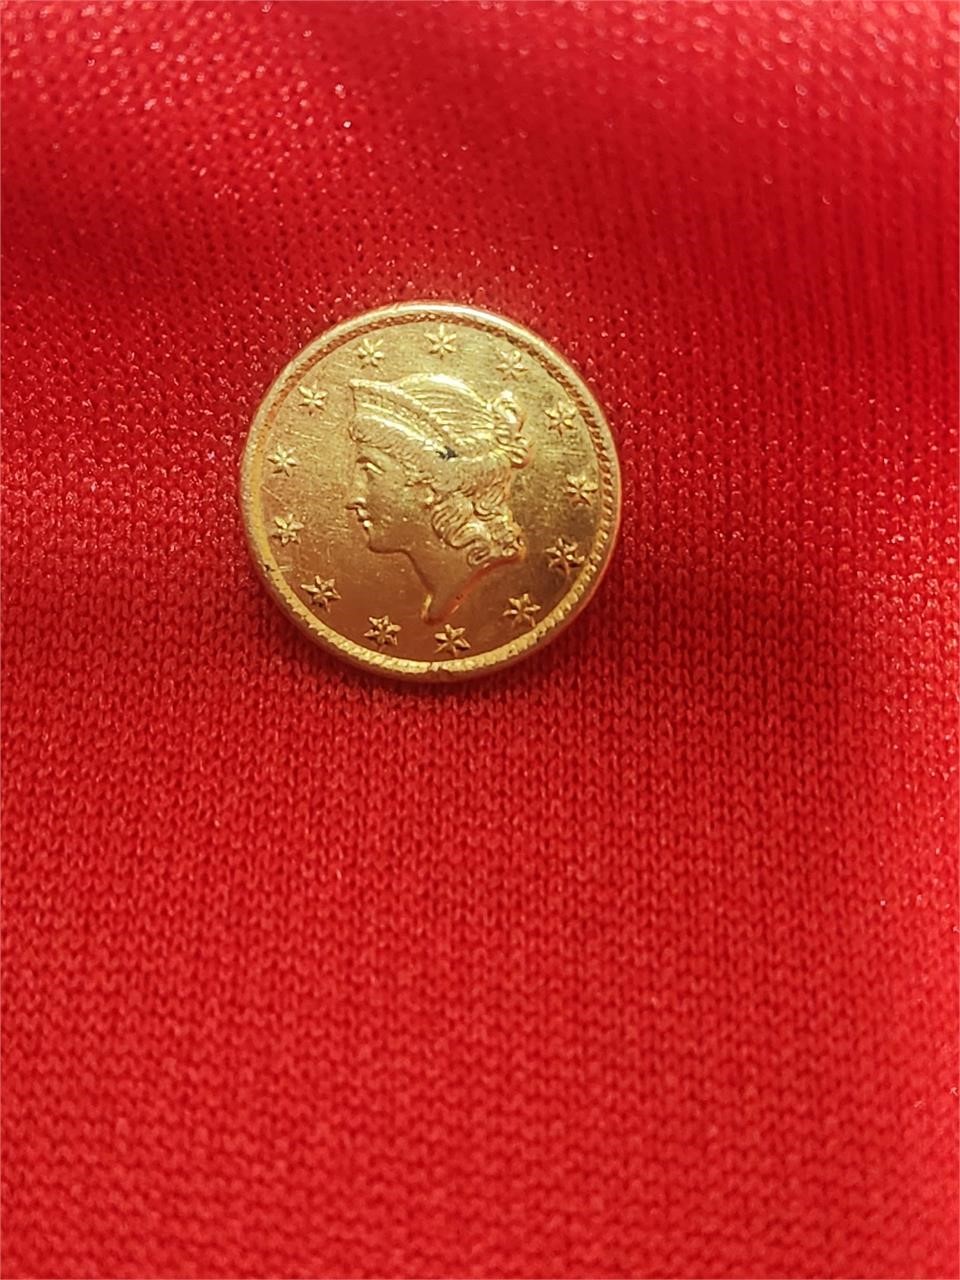 1850-C Gold Coin $1Liberty Head Type 1 MS